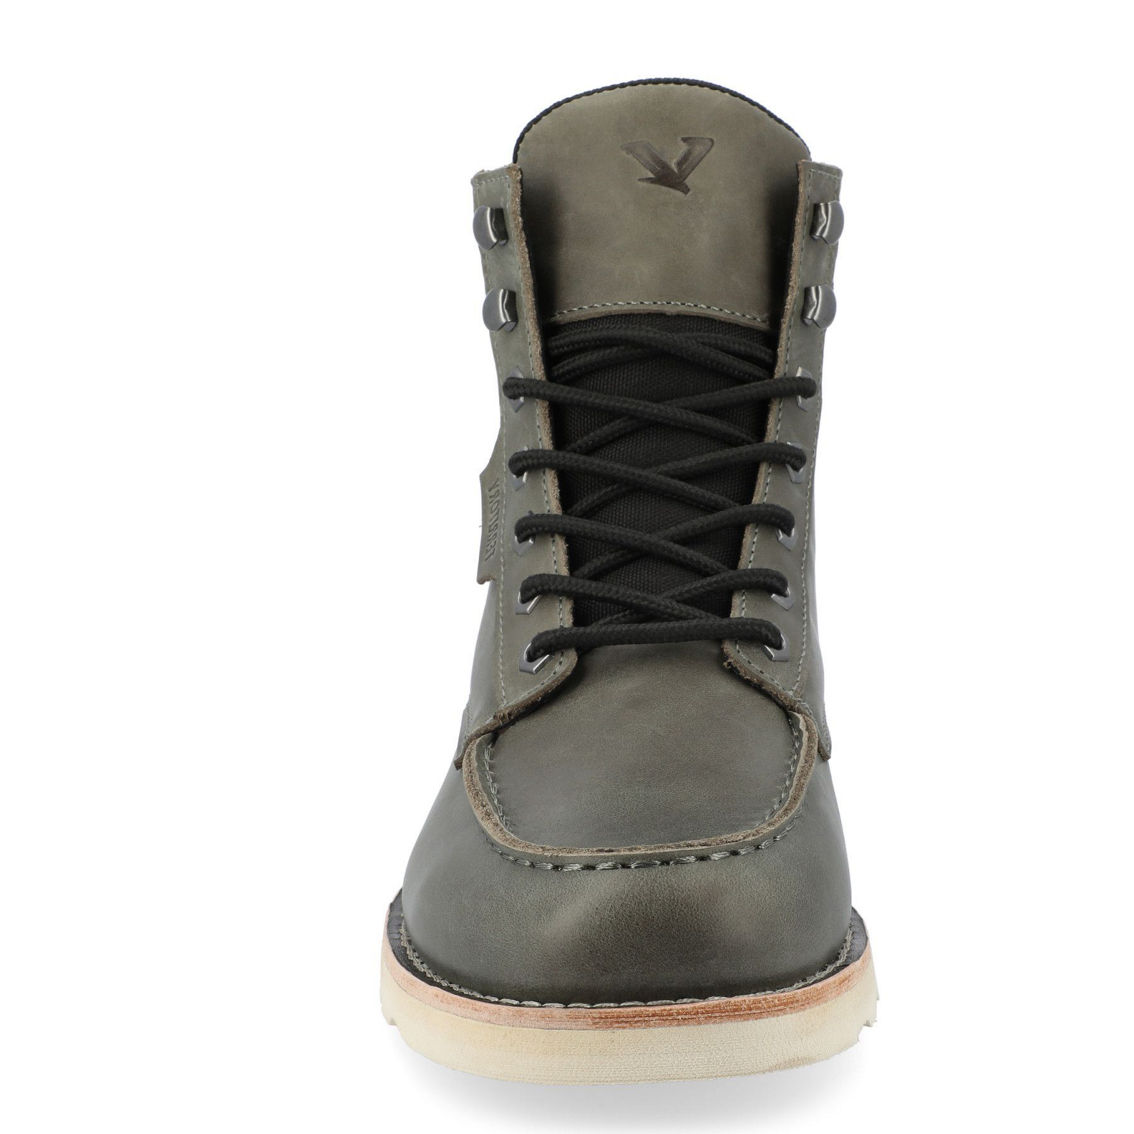 Territory Venture Water Resistant Moc Toe Lace-up Boot - Image 2 of 5